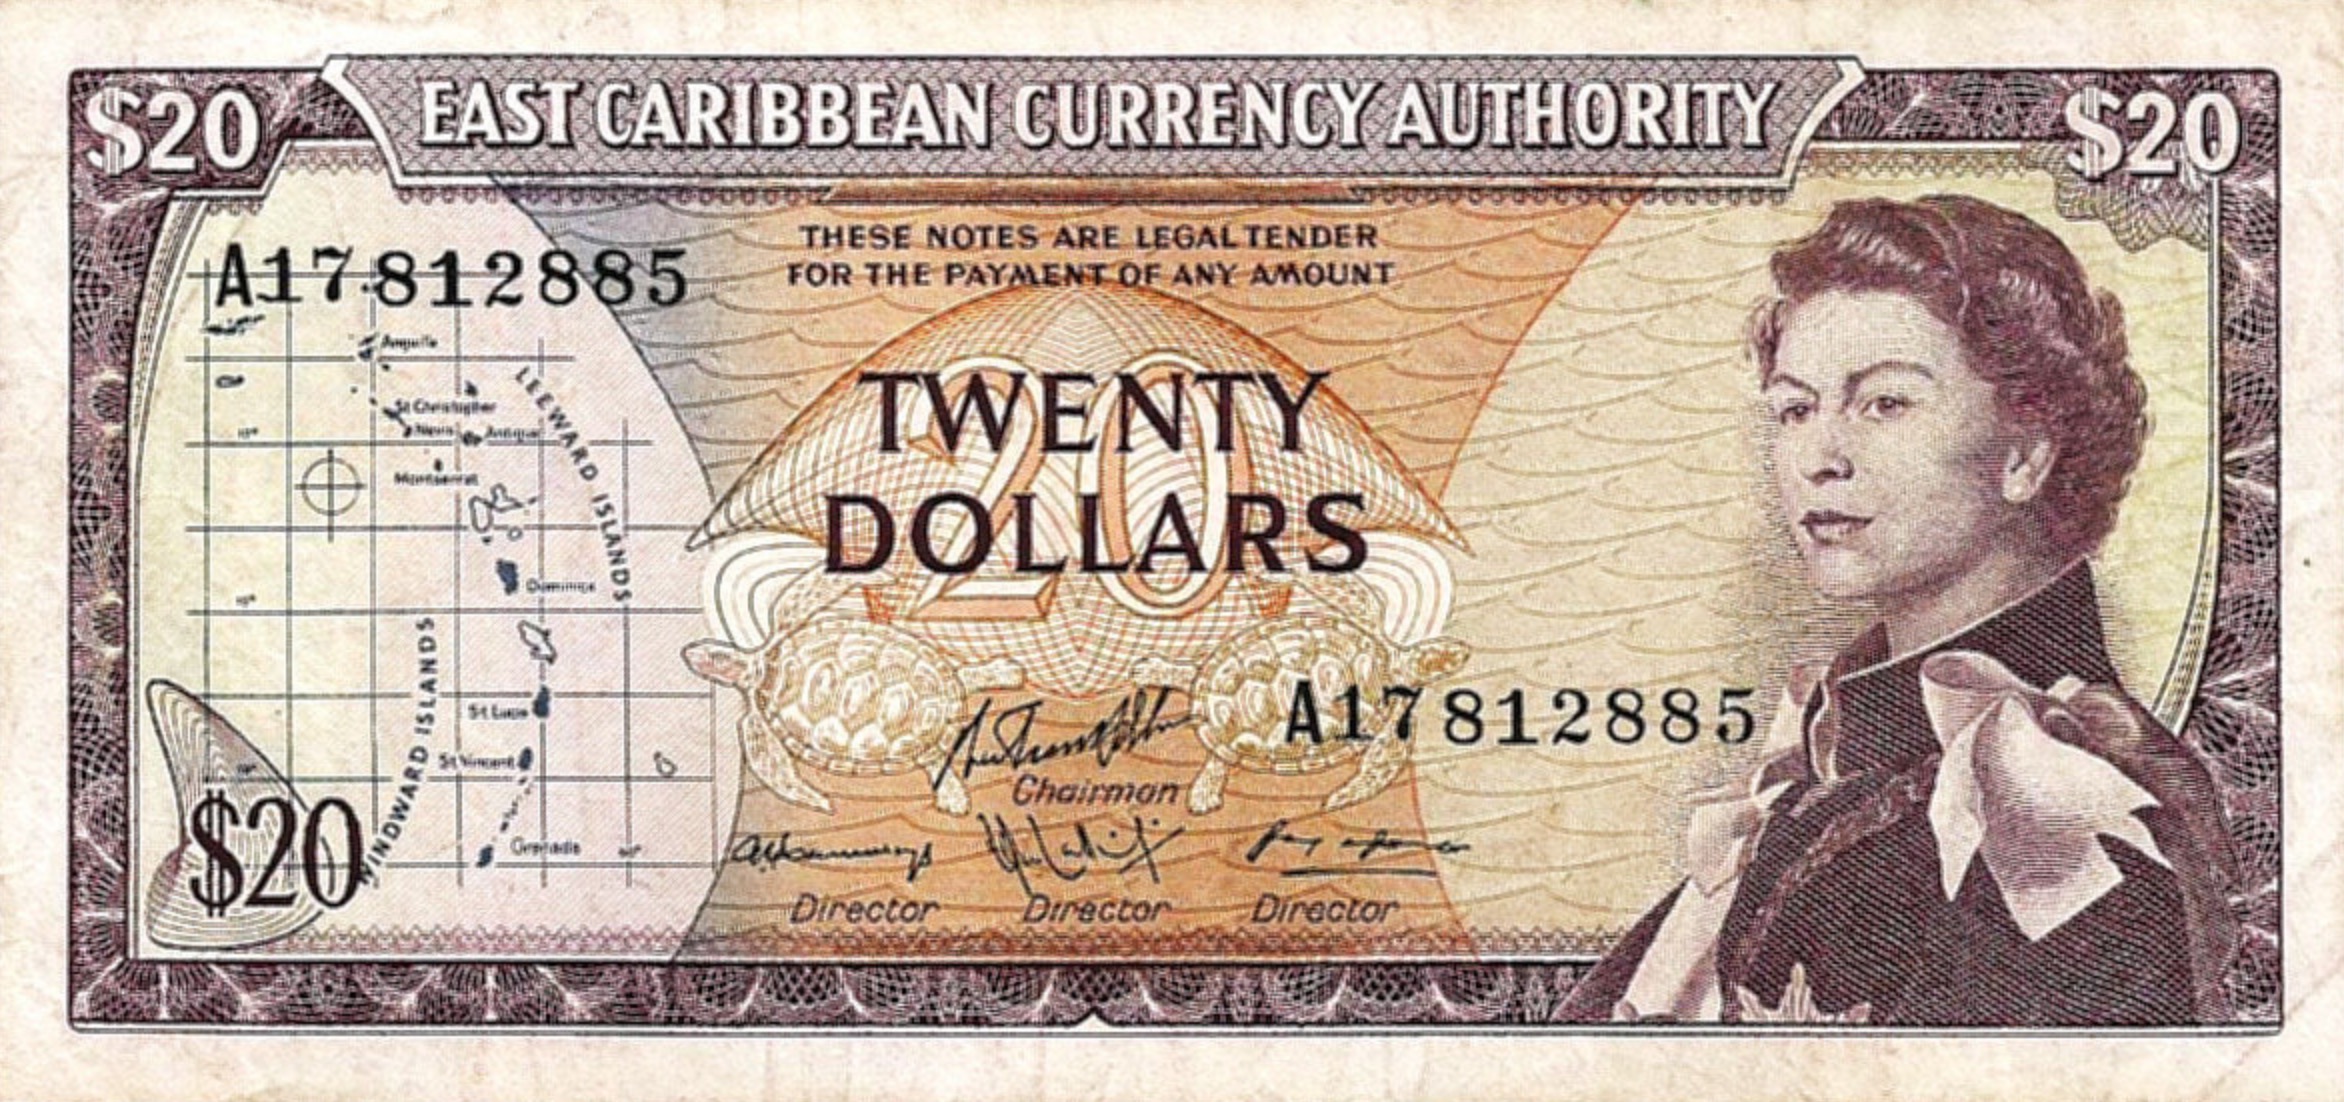 20 East Caribbean dollars banknote (1965 issue) - Exchange yours today